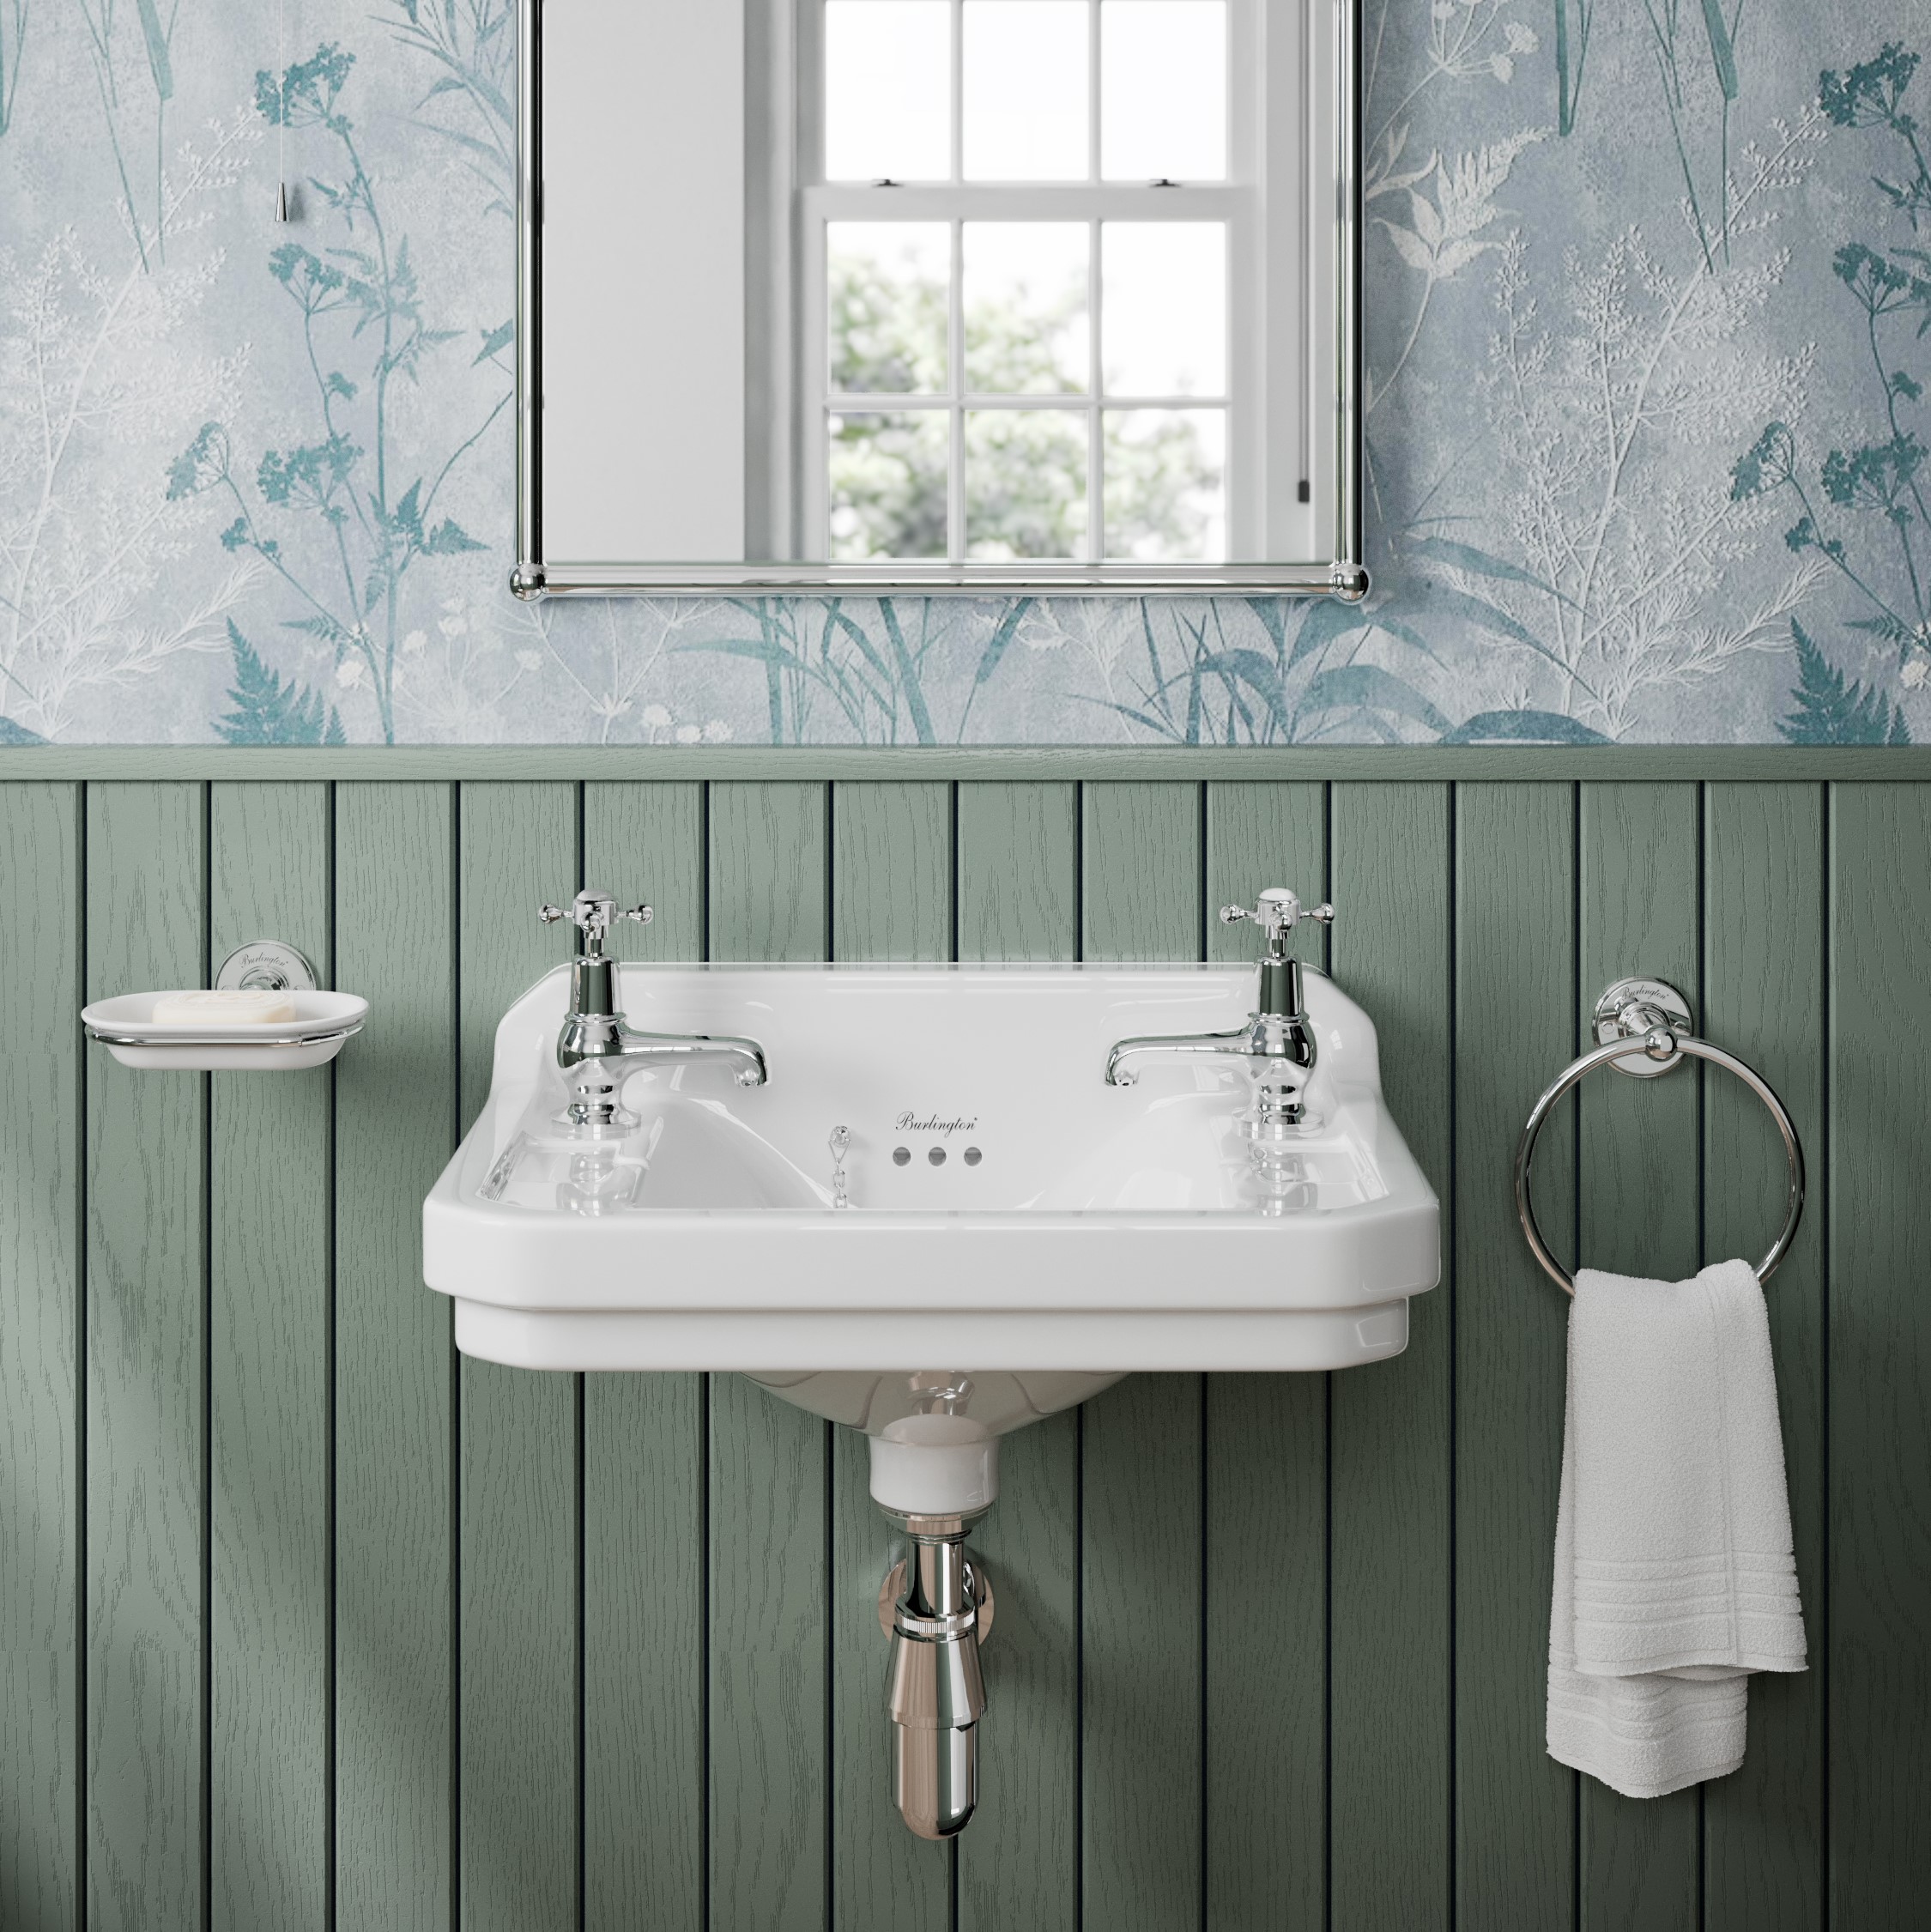 Edwardian Cloakroom Basin in a traditional white